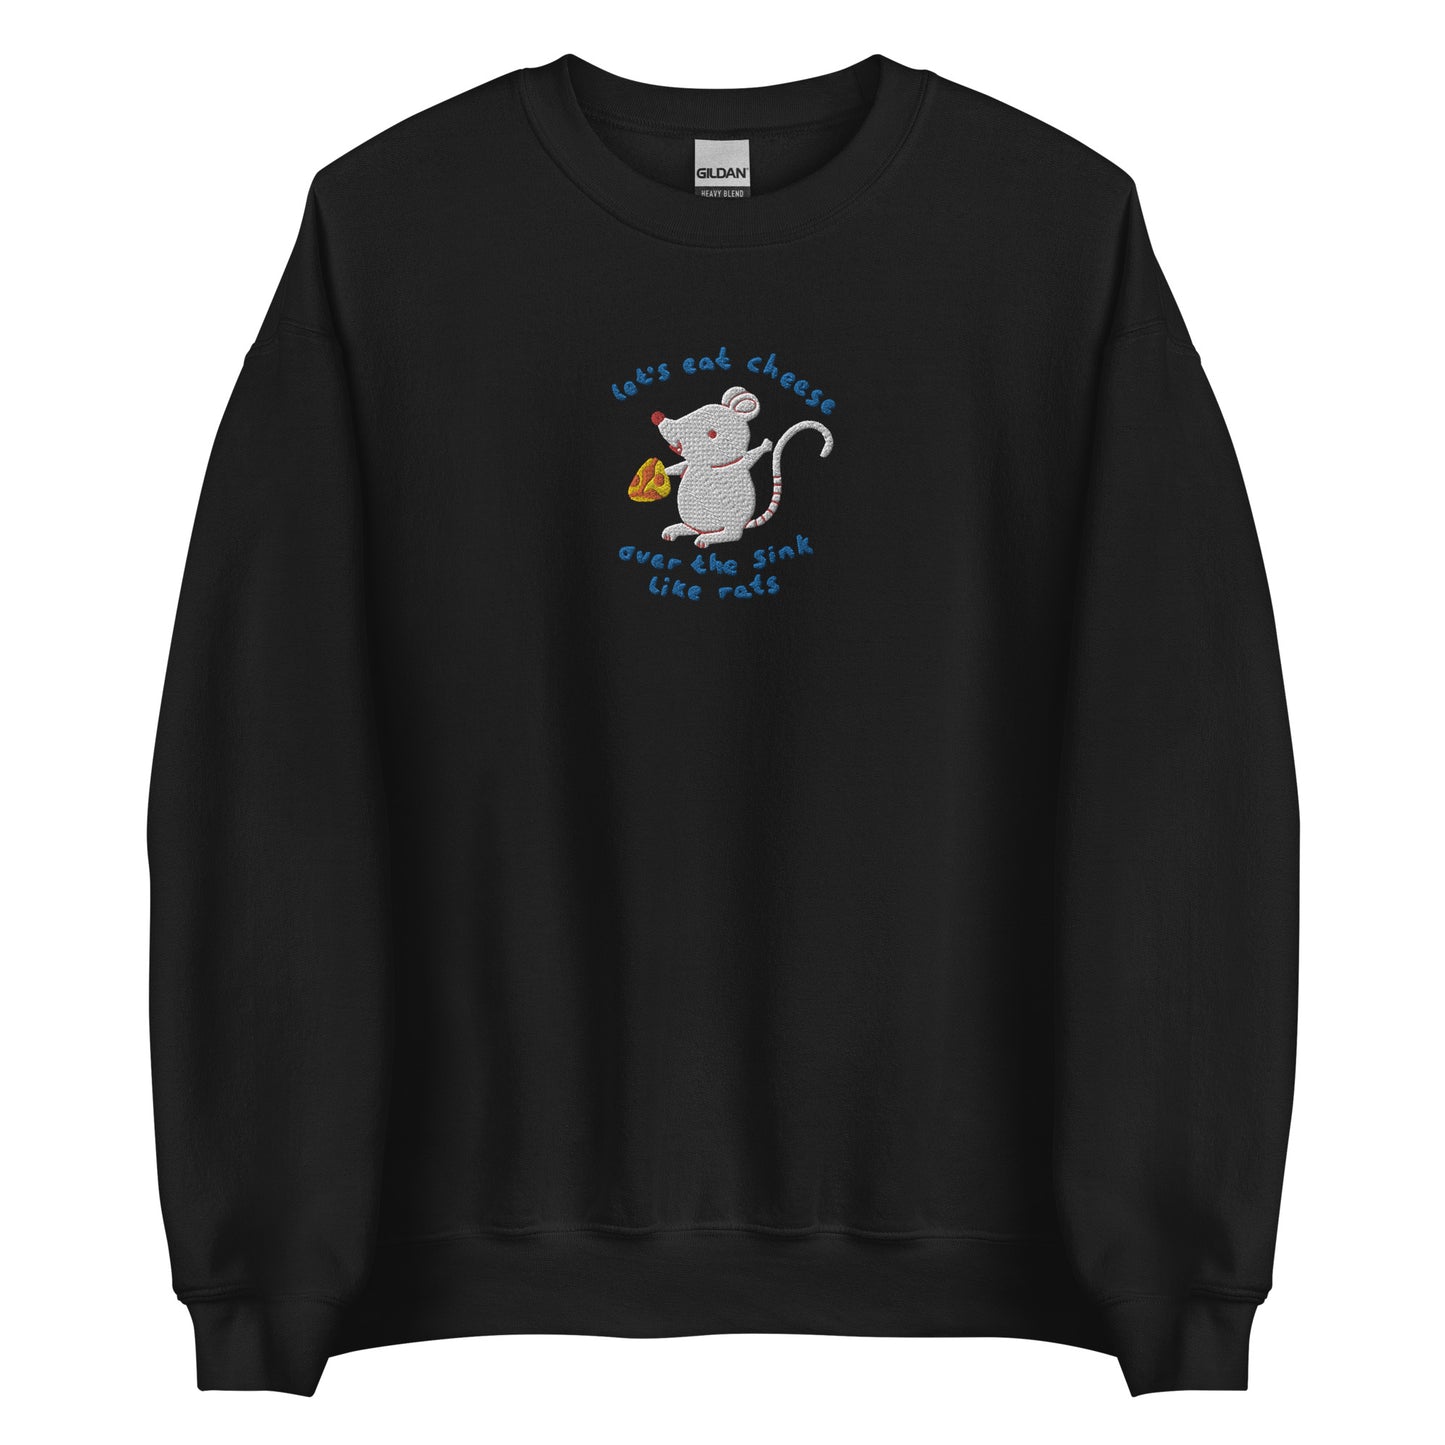 Let's Eat Cheese Embroidered Unisex Sweatshirt S - 5XL